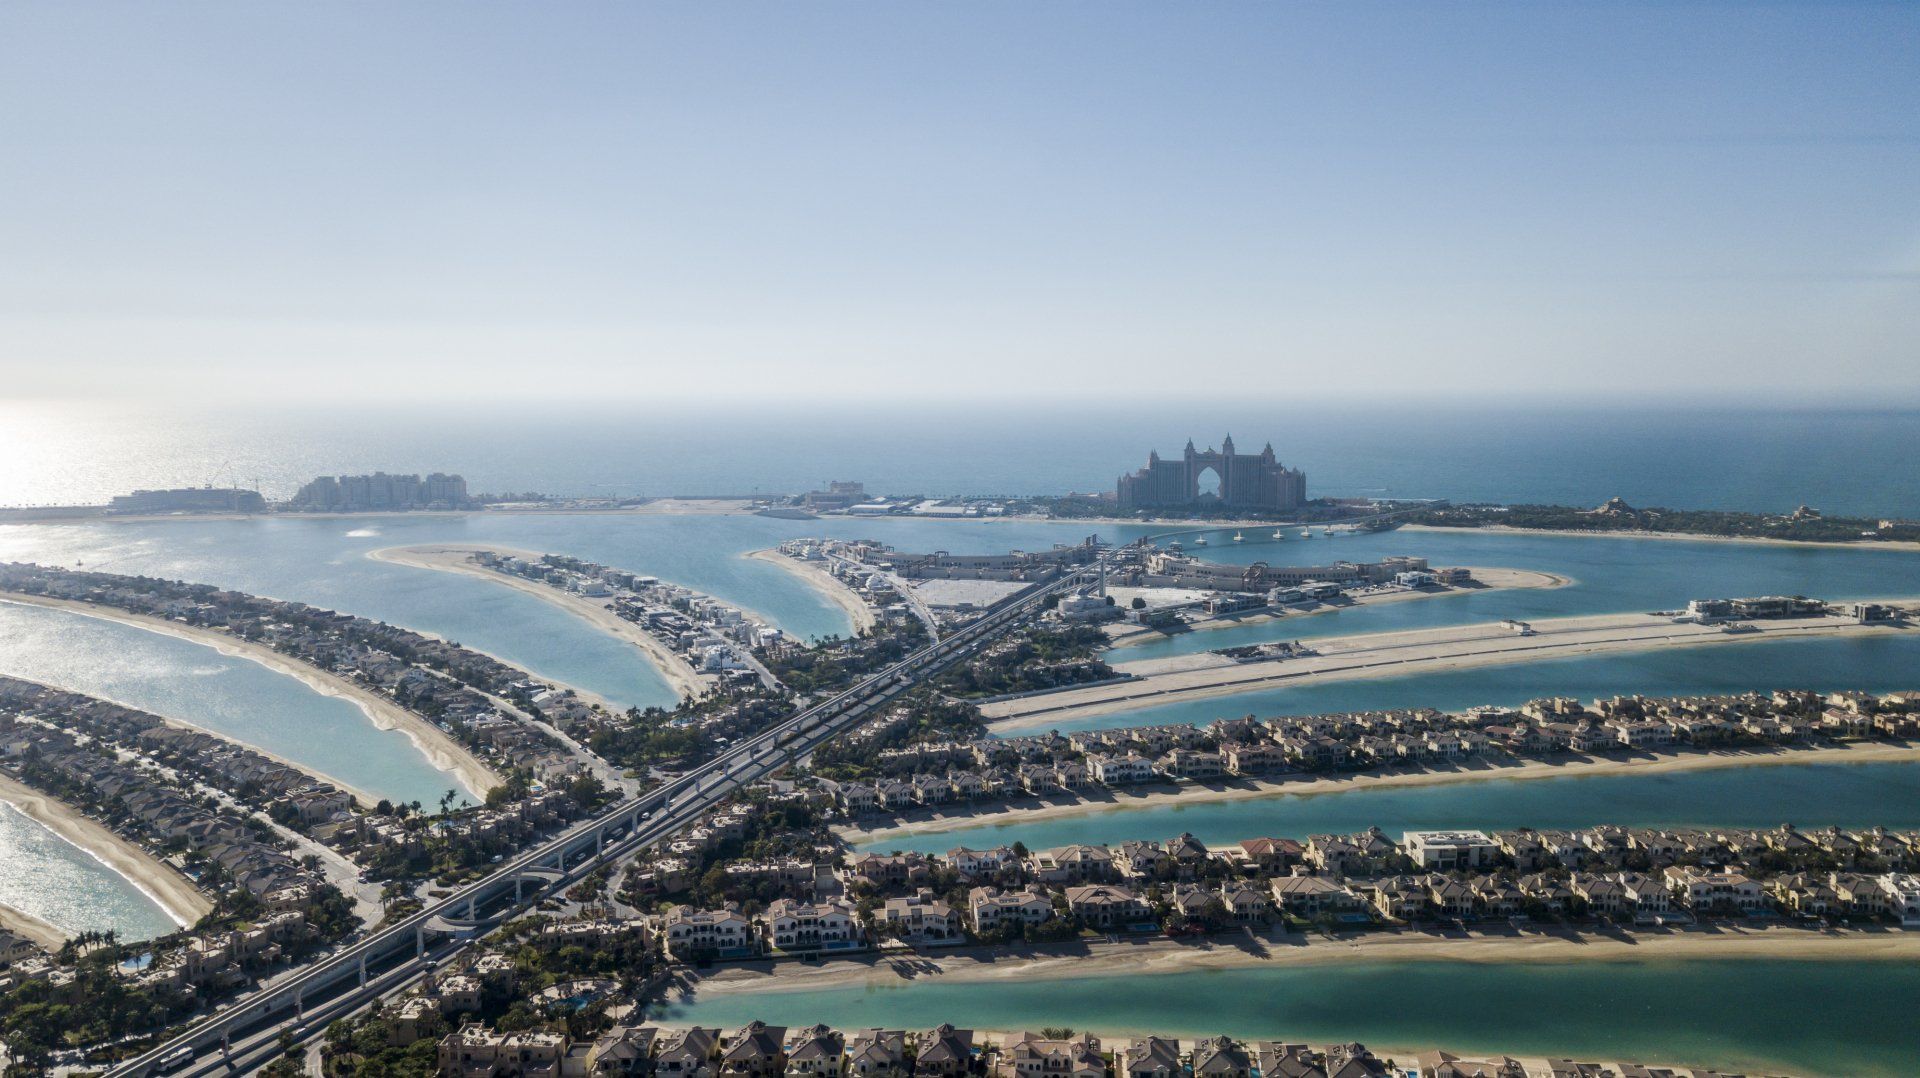 An aerial view of the palm jumeirah islands in the middle of the ocean.